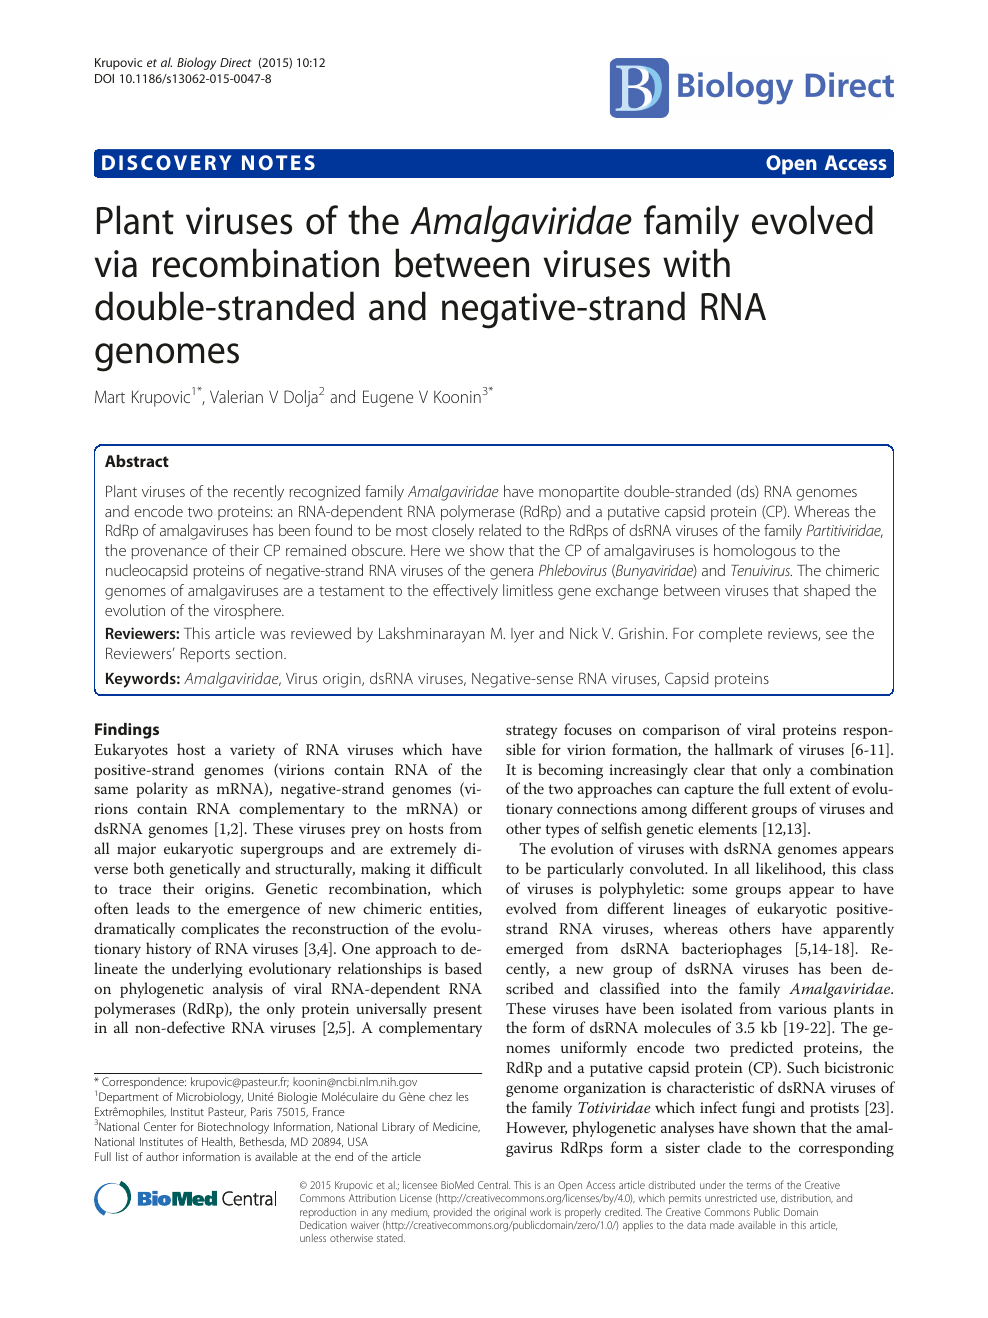 Plant Viruses Of The Amalgaviridae Family Evolved Via Recombination Between Viruses With Double Stranded And Negative Strand Rna Genomes Topic Of Research Paper In Biological Sciences Download Scholarly Article Pdf And Read For